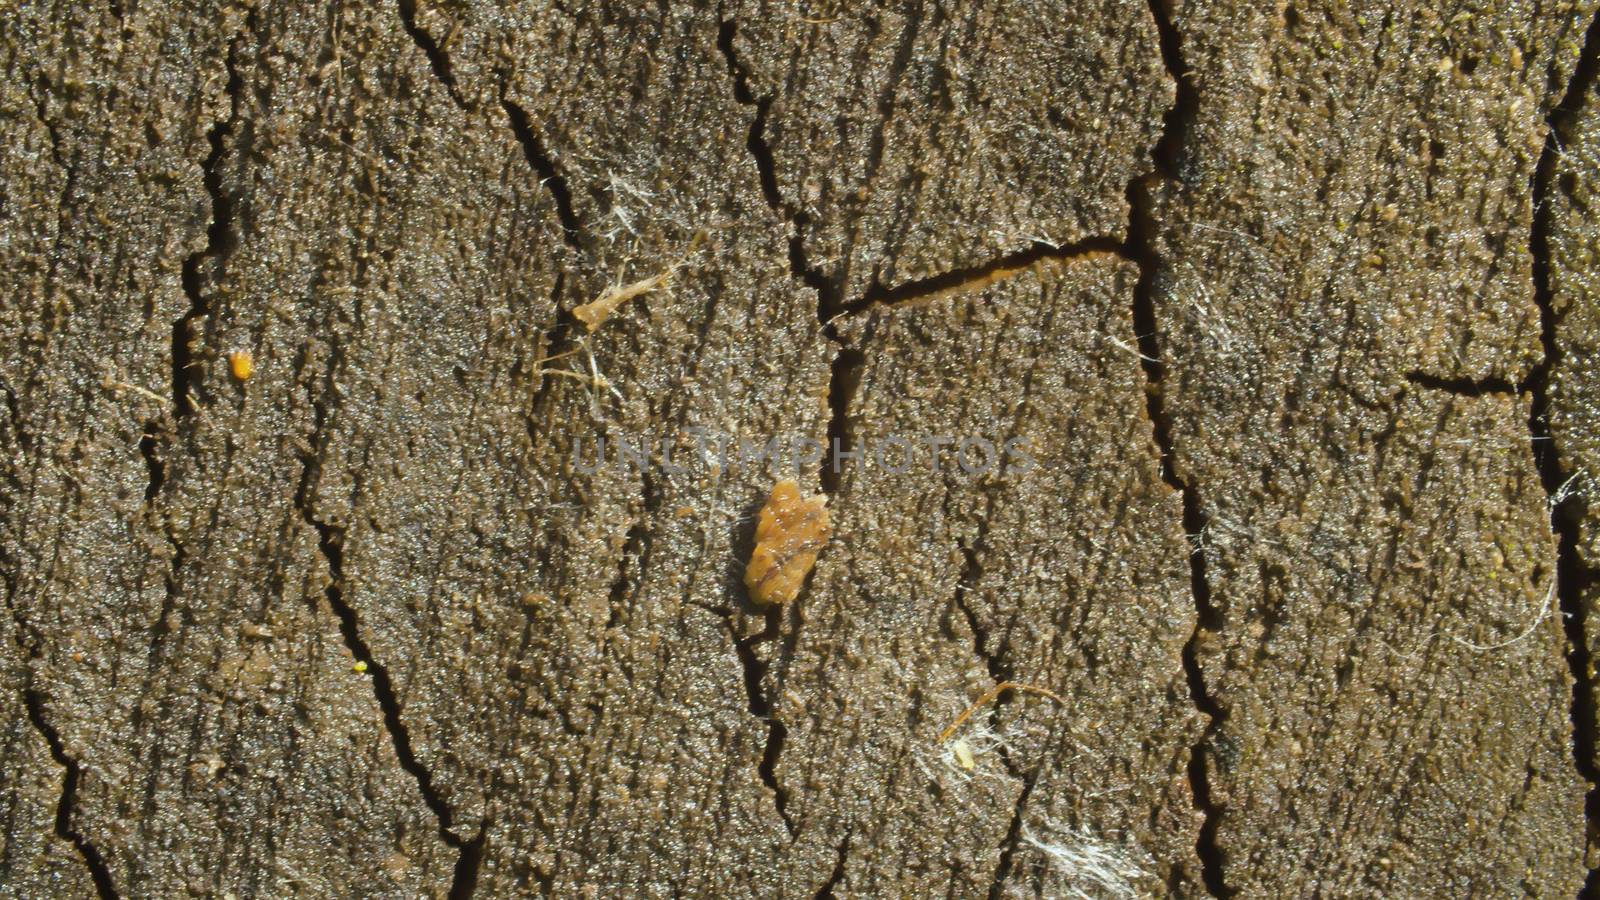 Close up view of old cracked wood cut. Macro shooting, camera slowly moving along the wood. Abstract textured background